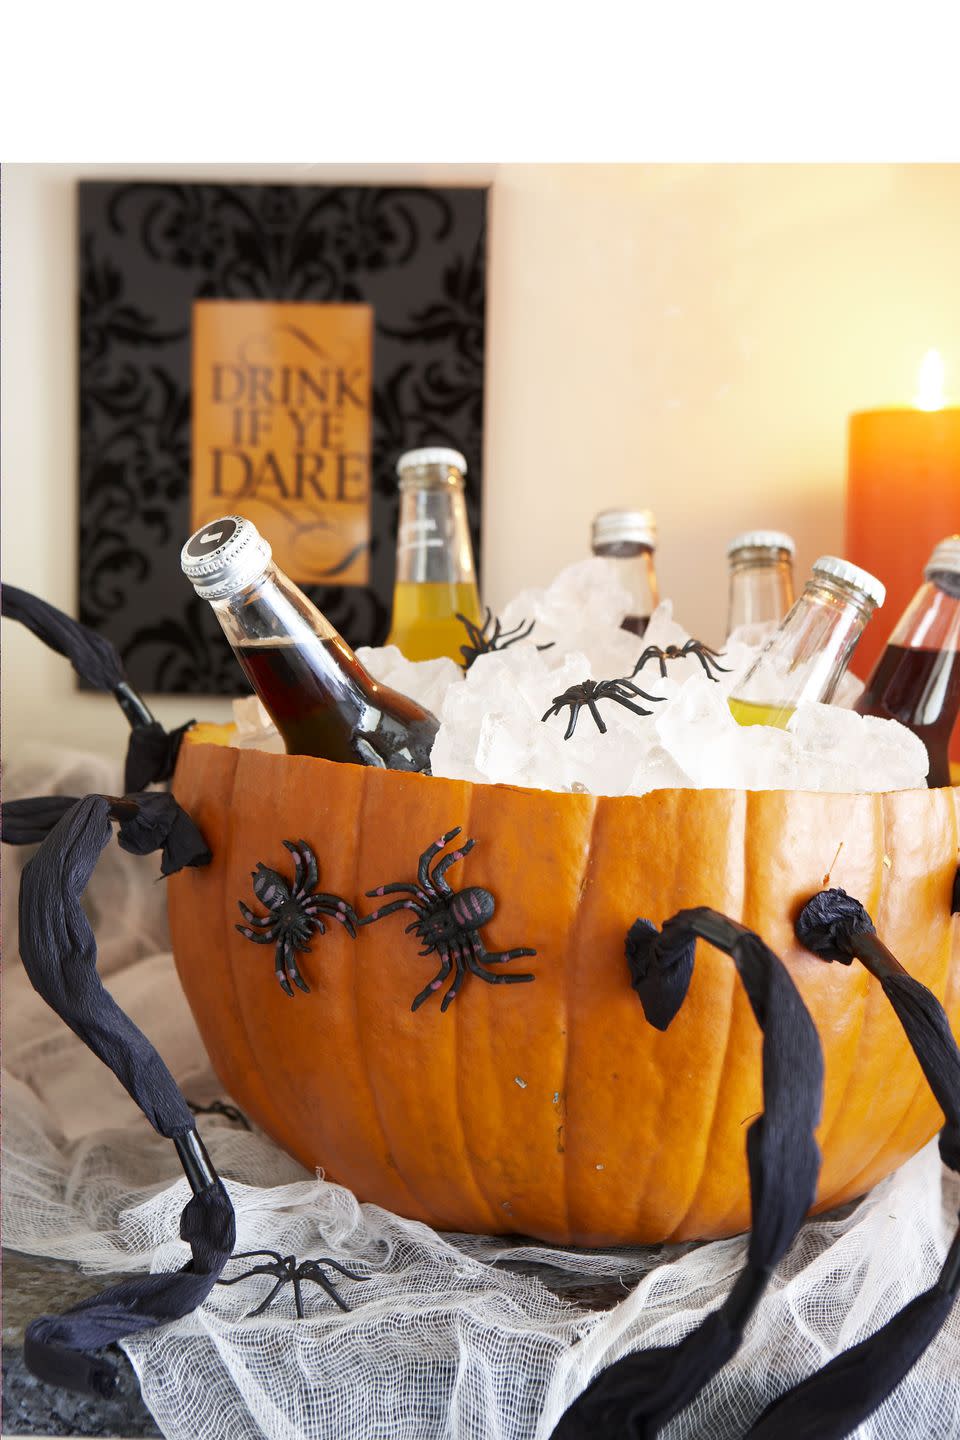 <p>Cut a large pumpkin in half and scoop the insides out of the bottom portion. Fill with ice and decorate it with faux spiders, and you've got the spookiest drink display on the block.</p>